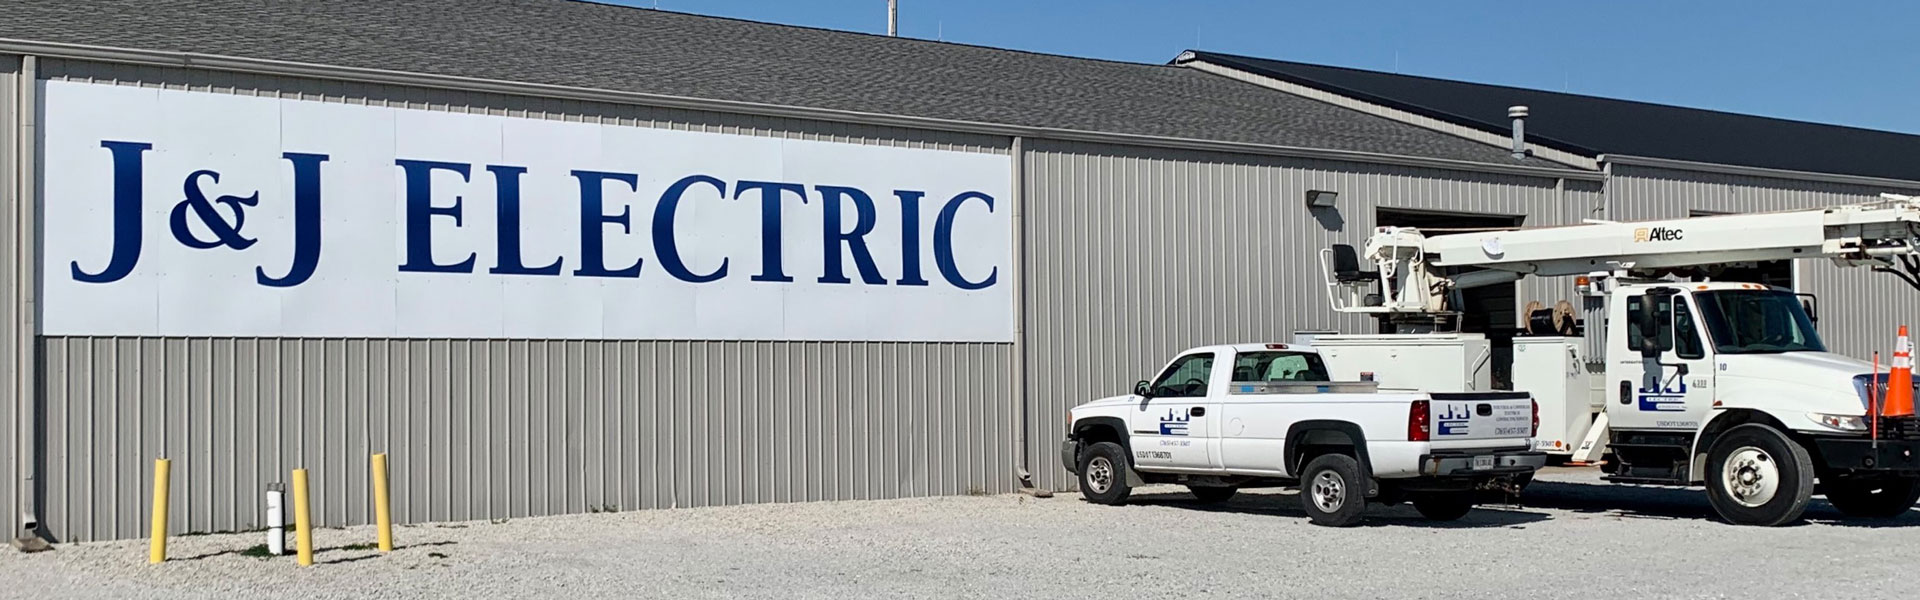 J & J electric building and trucks